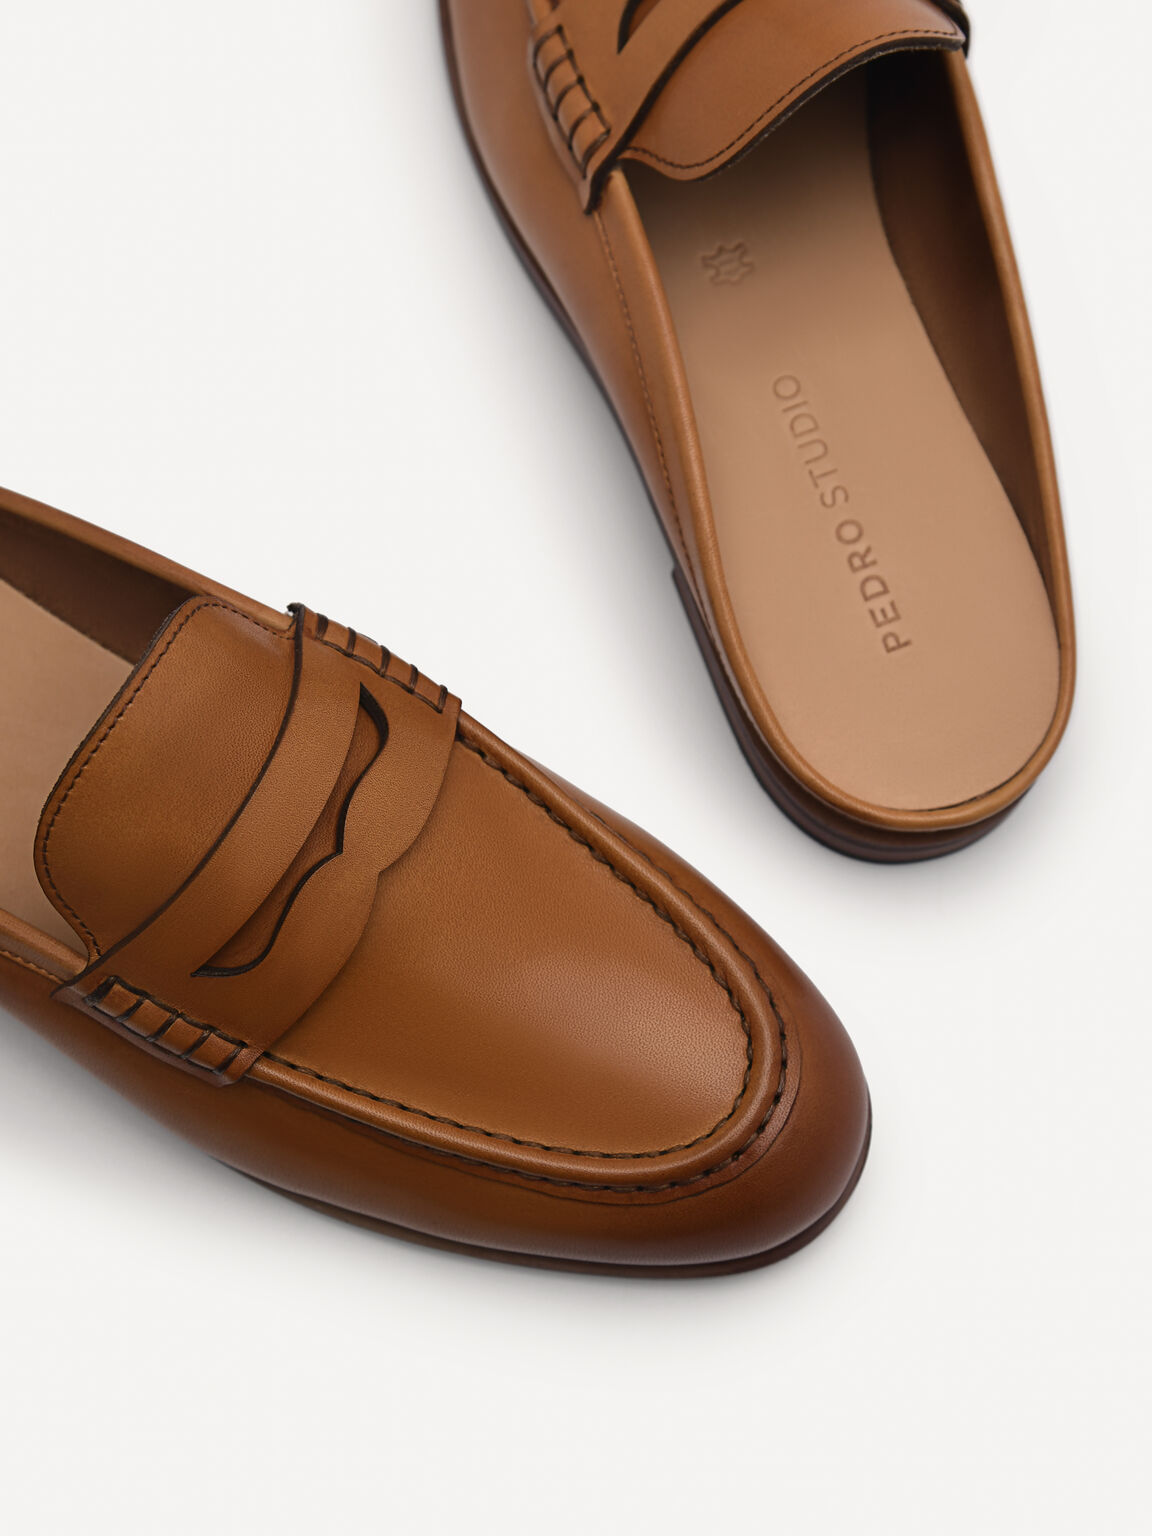 Blake Leather Penny Loafer Mules, Camel